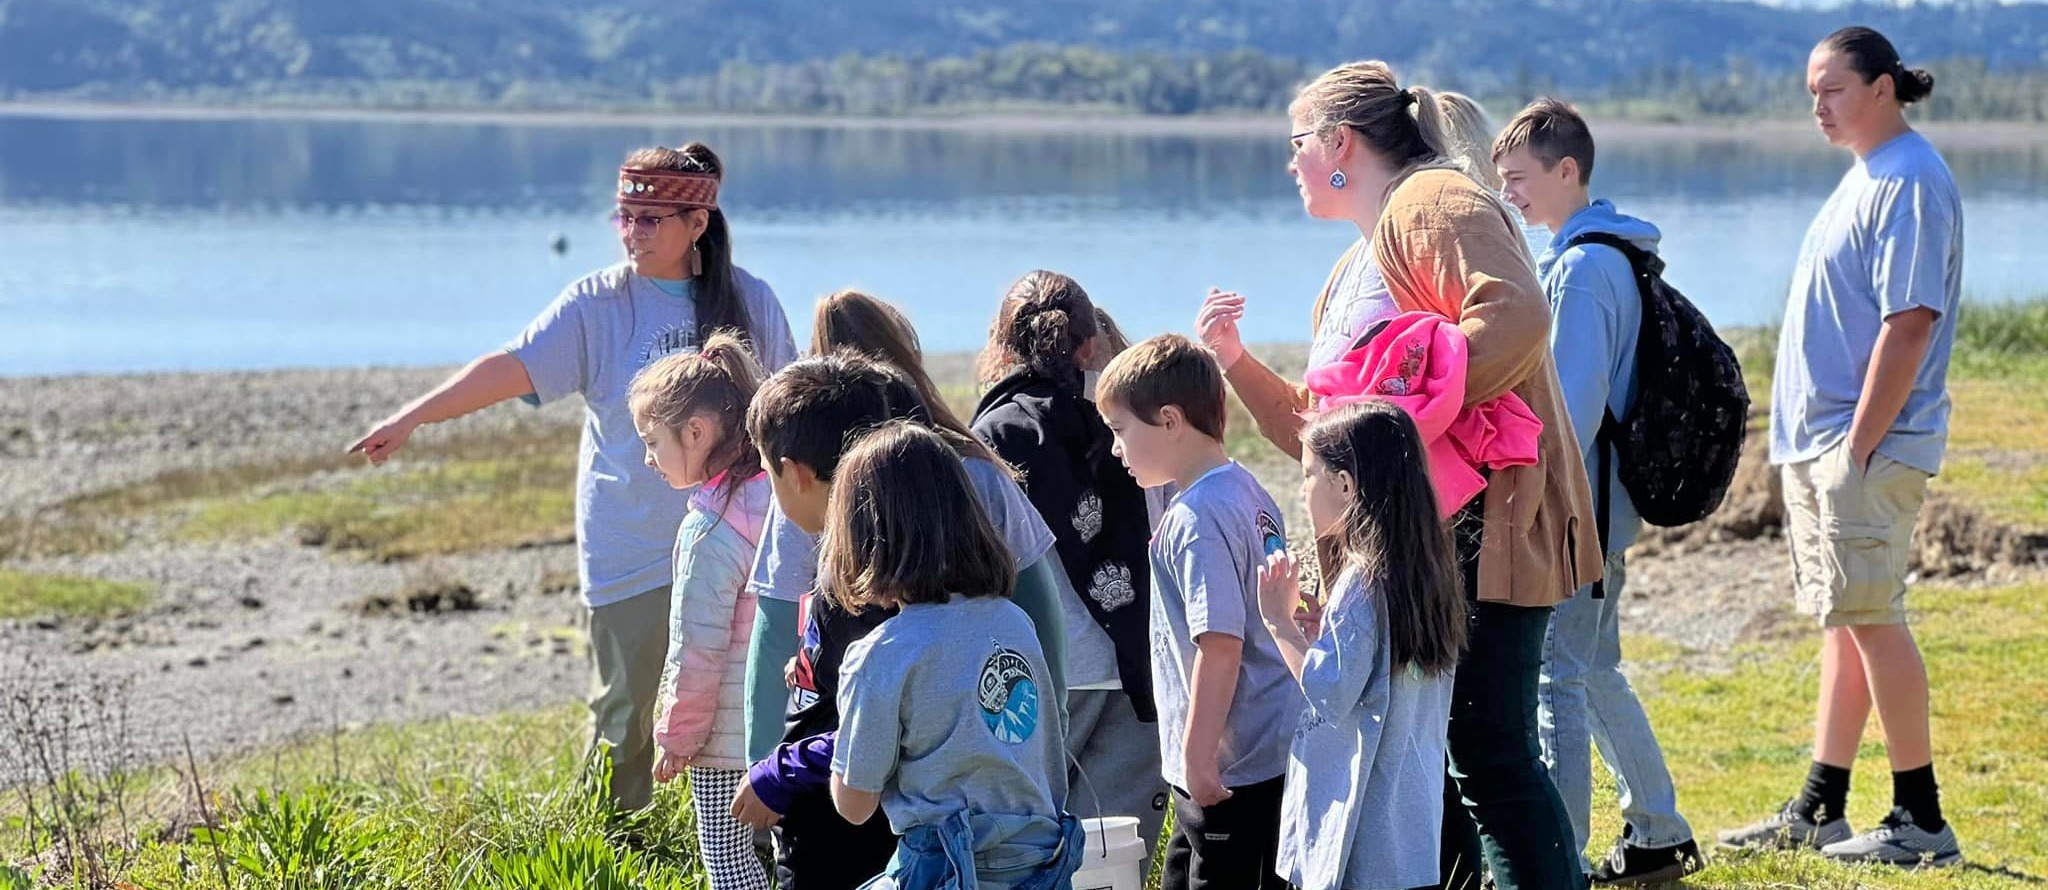 Students at Potlatch State Park for Earth Day